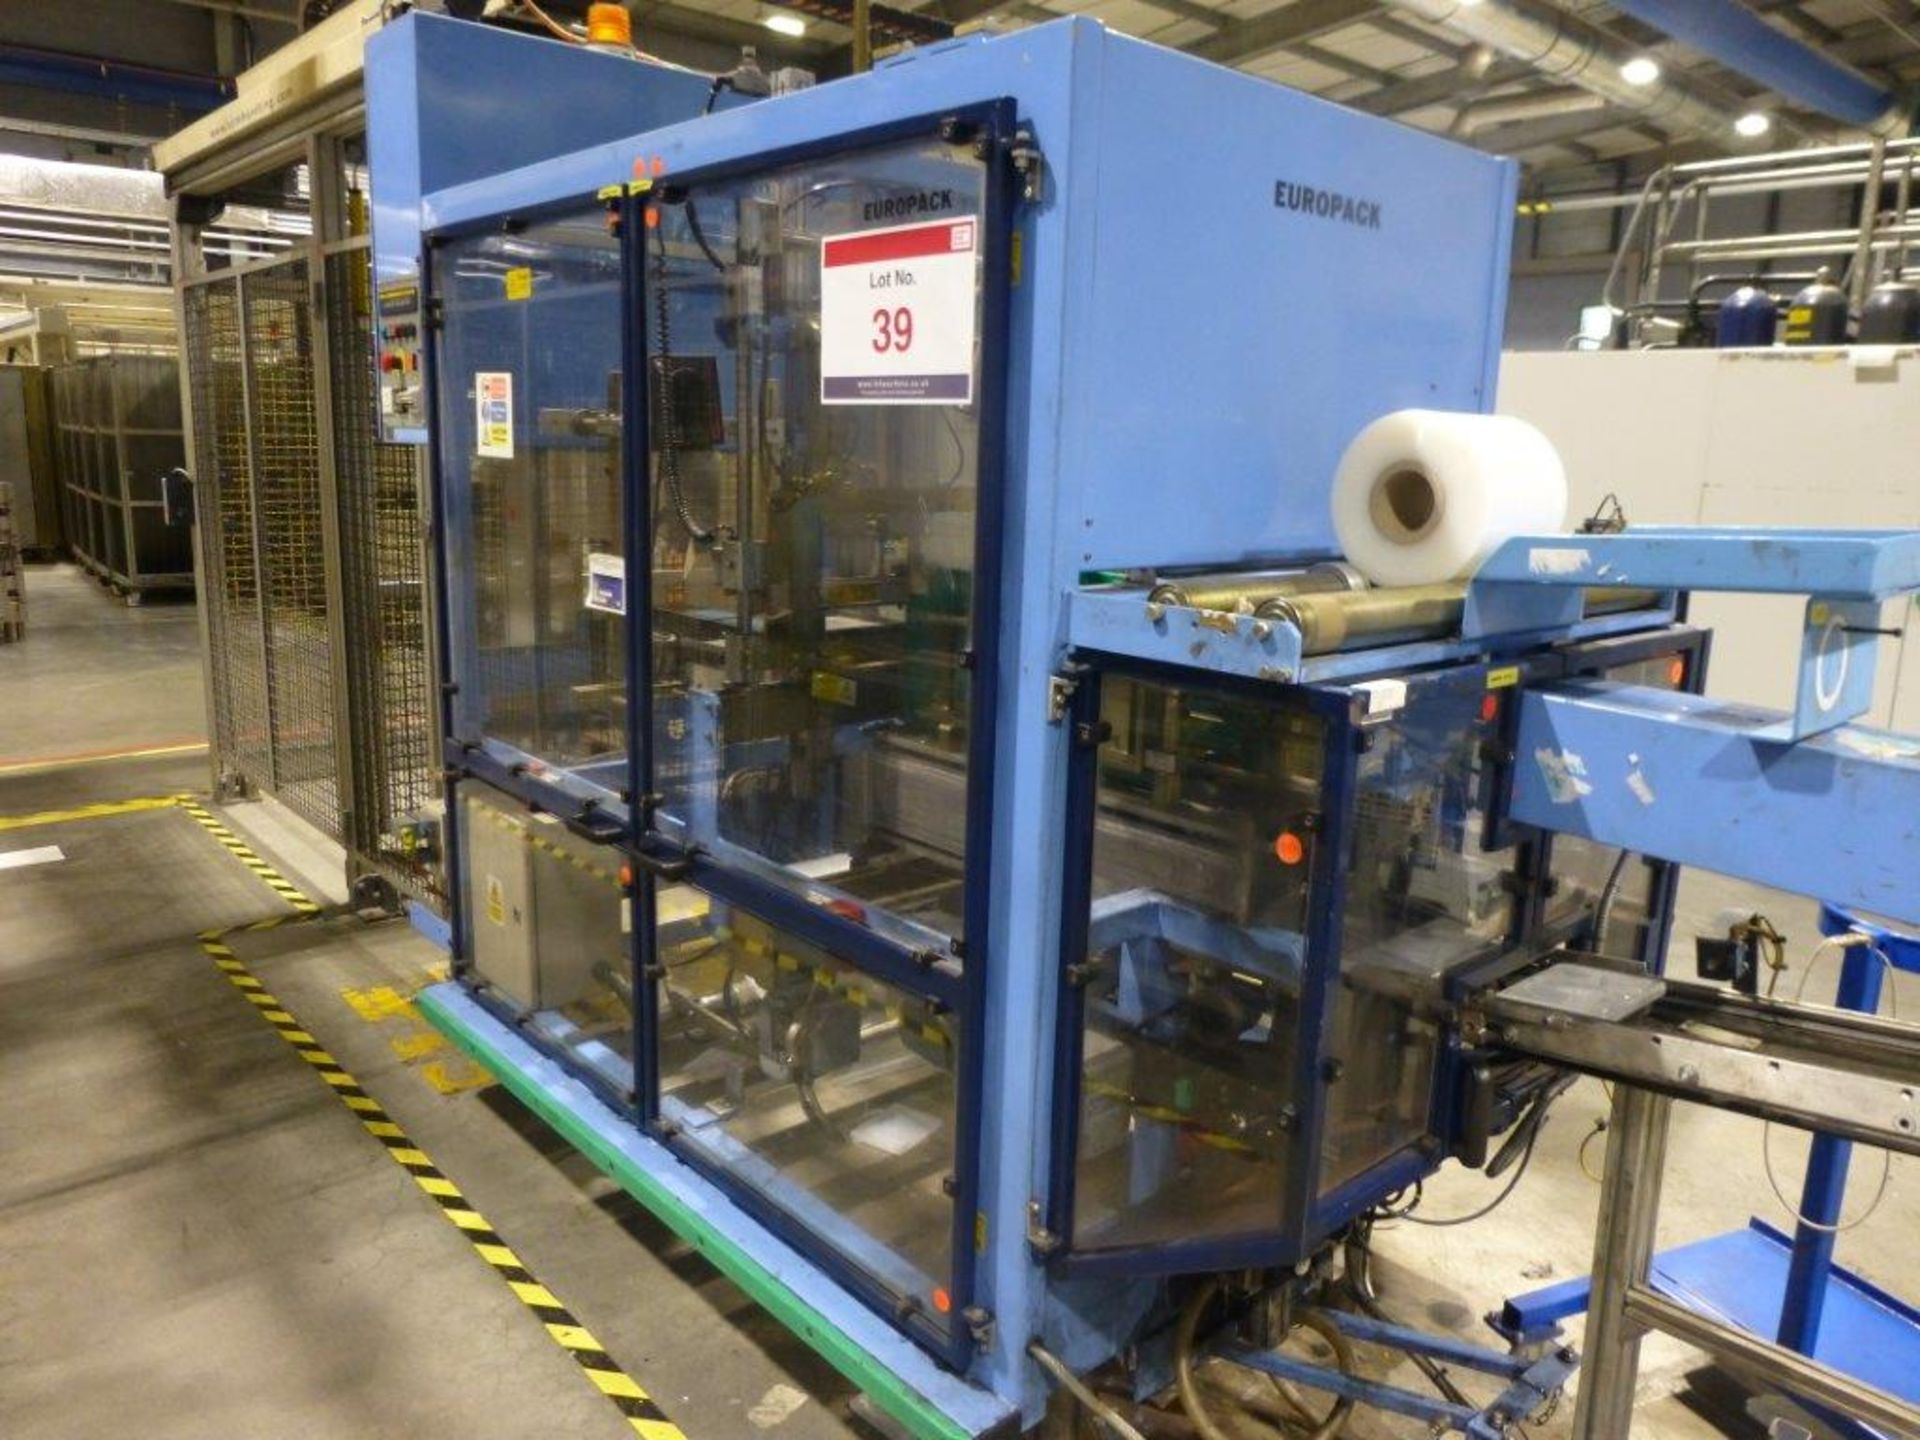 GEI Europack Collator / Wrapper/ Bander with 1300mm x 140mm roller conveyor. Please note: A